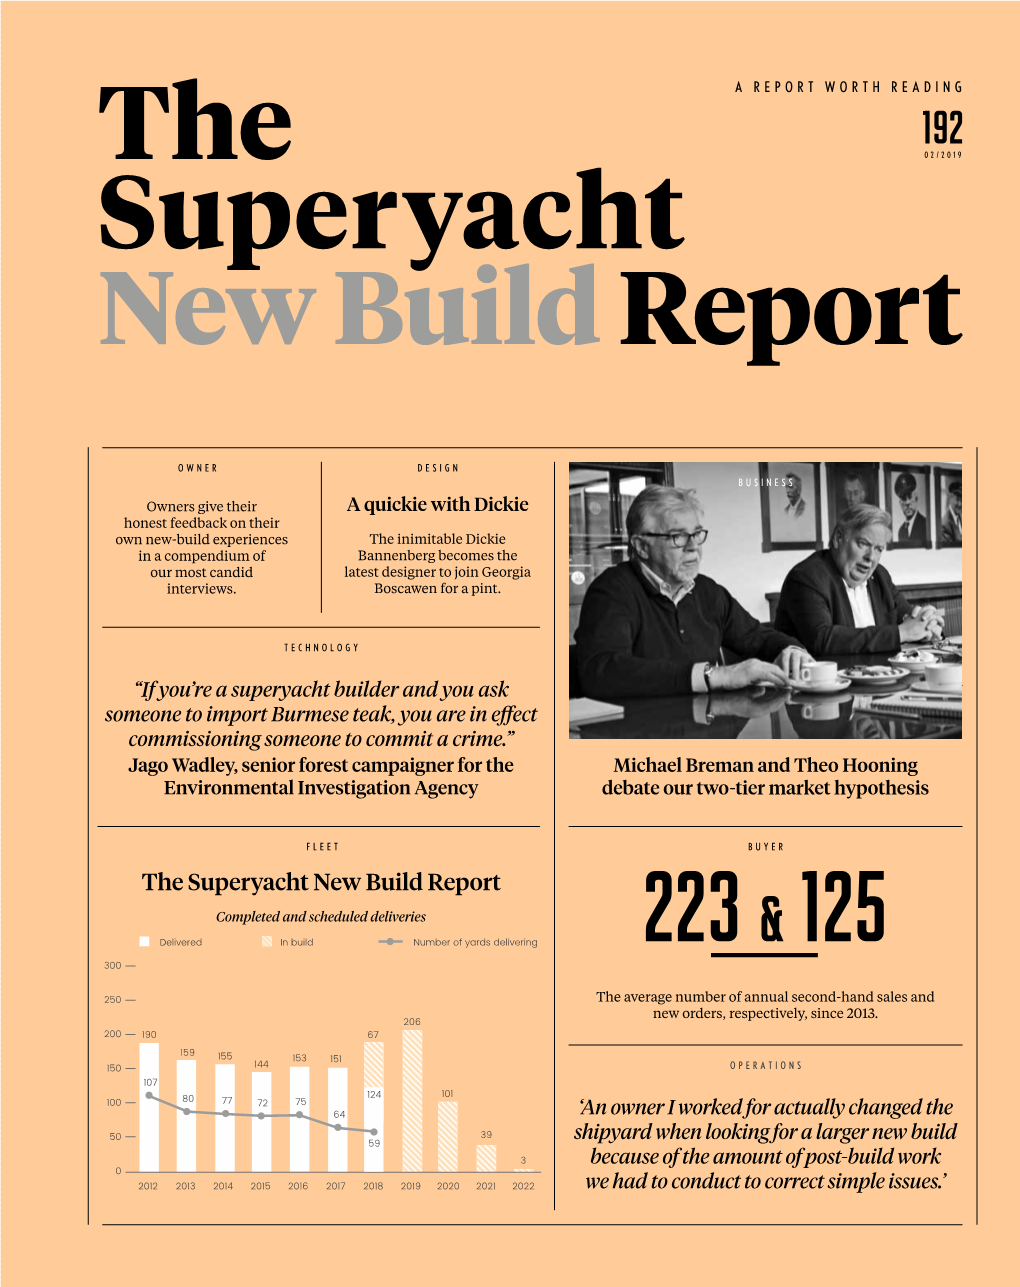 The Superyacht New Build Report